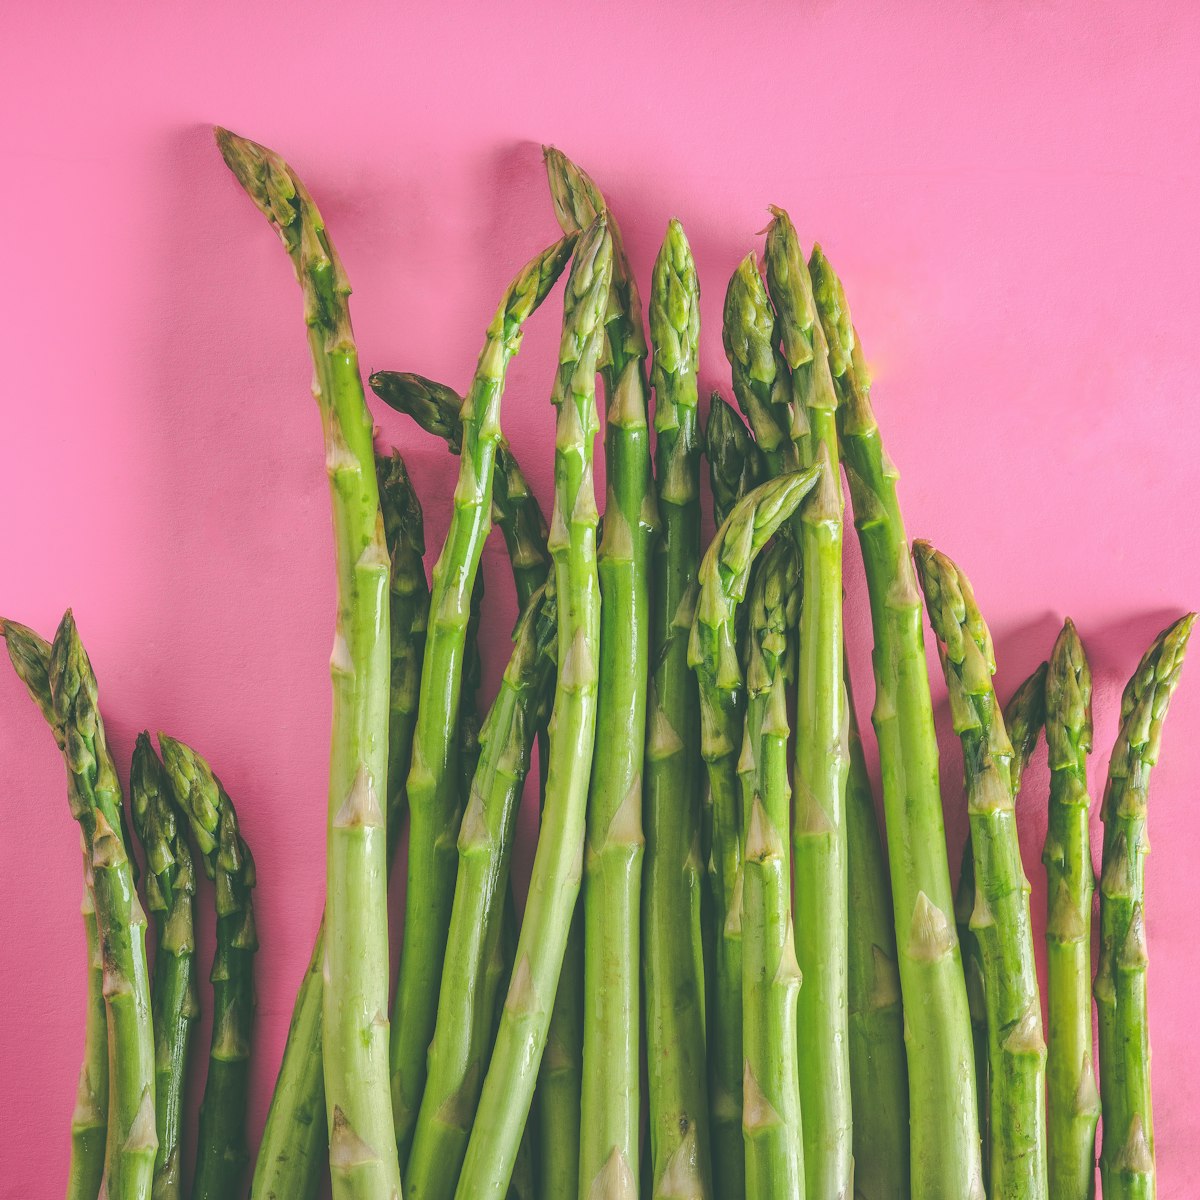 How To Cook Asparagus: A Quick Guide To Roast Asparagus Perfectly